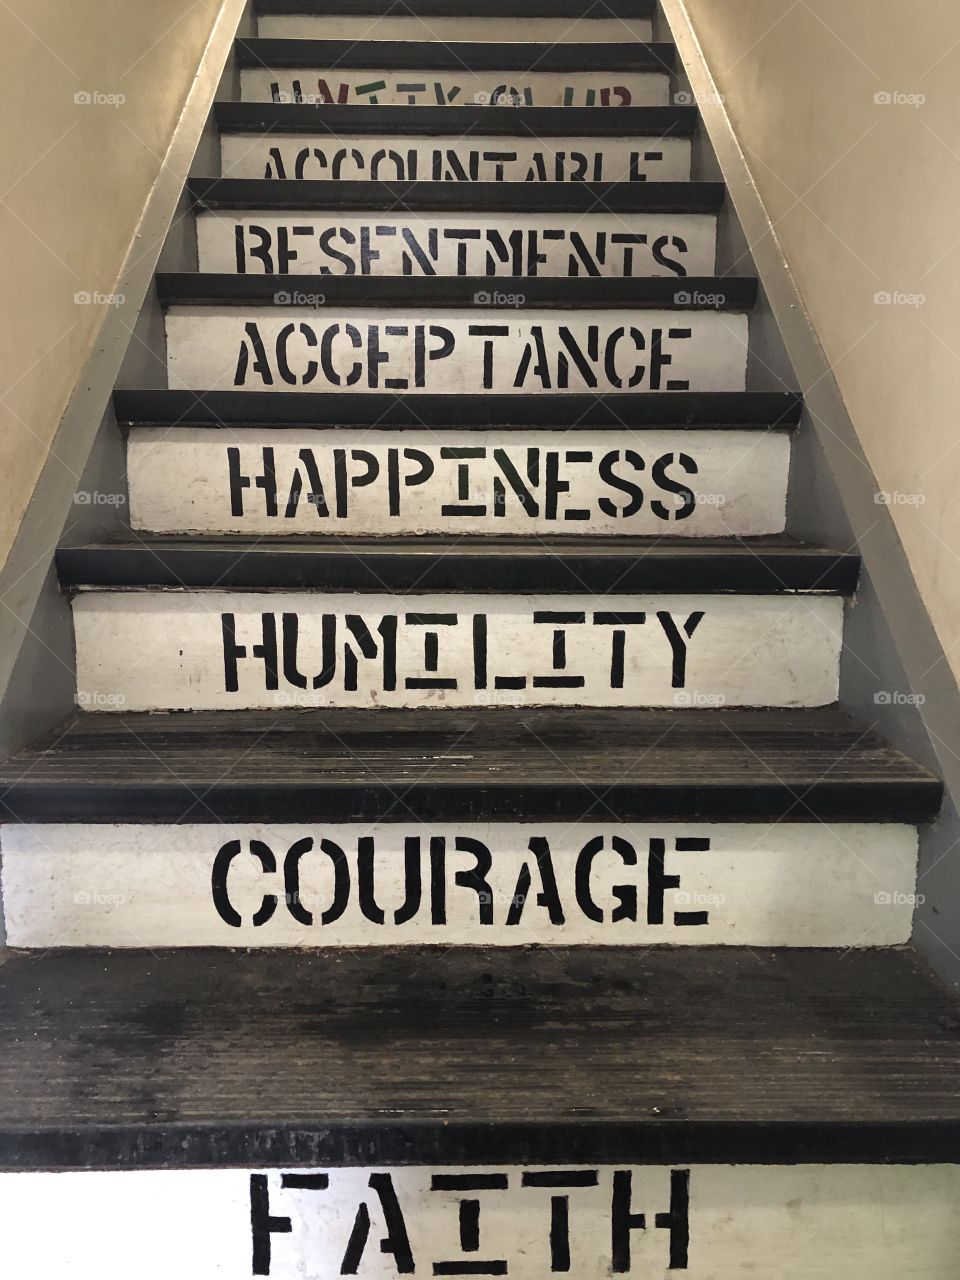 The stairs of Unity Club, a sanctum for addicts in the NoVa area, is inscribed with recovering addicts’ core values